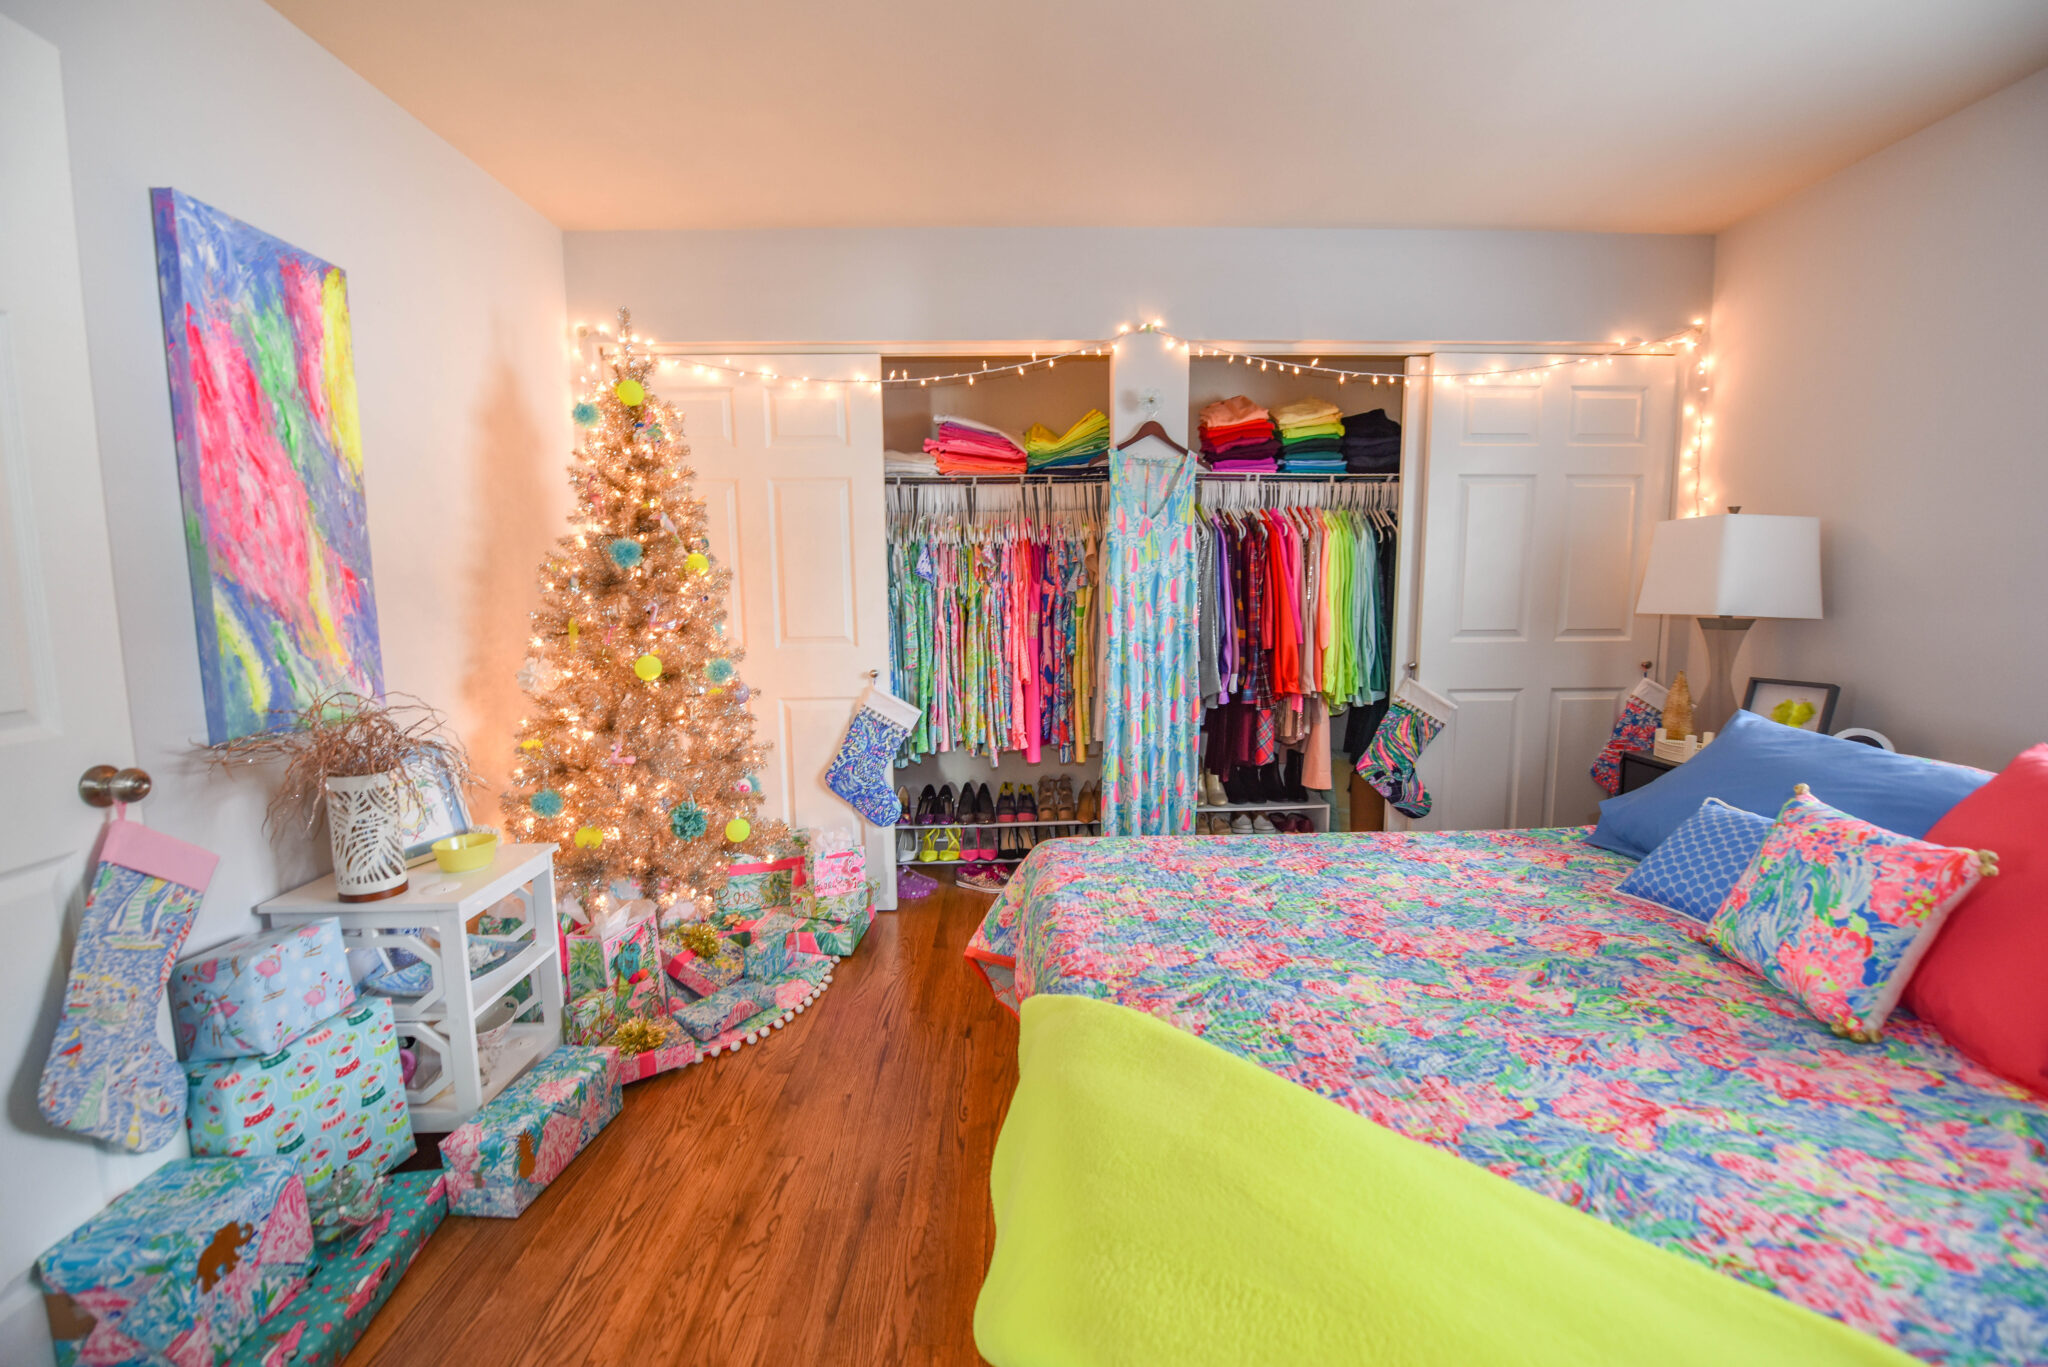 Lilly Pulitzer Christmas